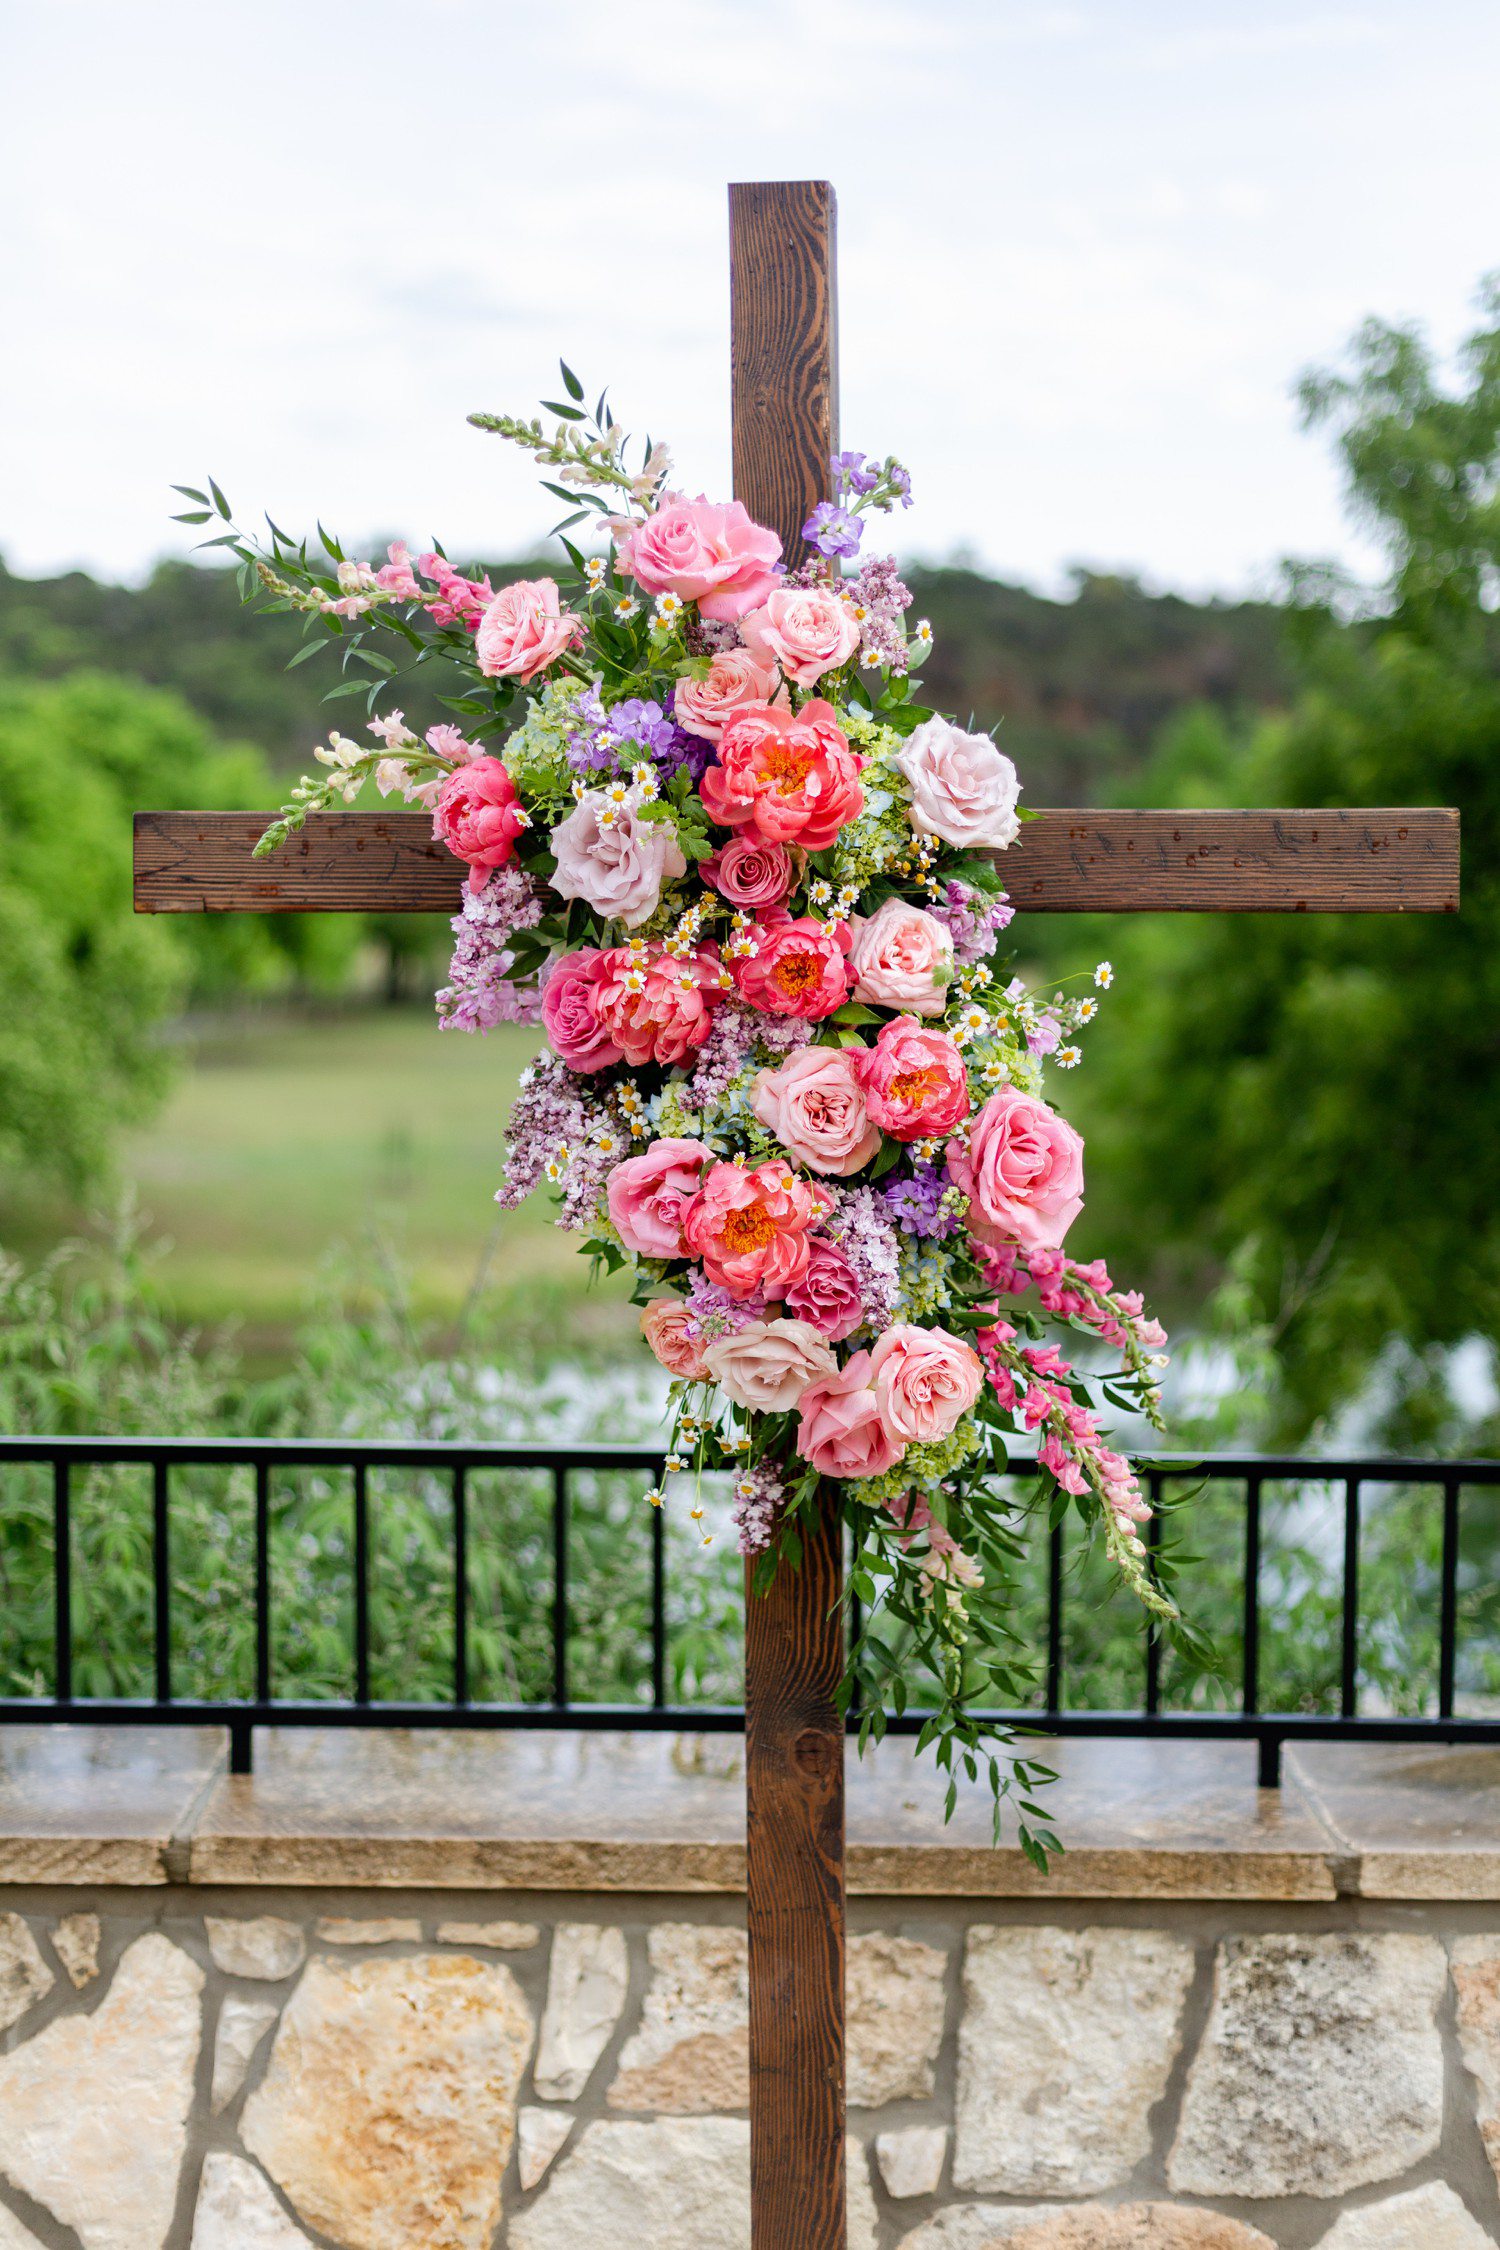 Wedding ceremony cross decorated with flowers.